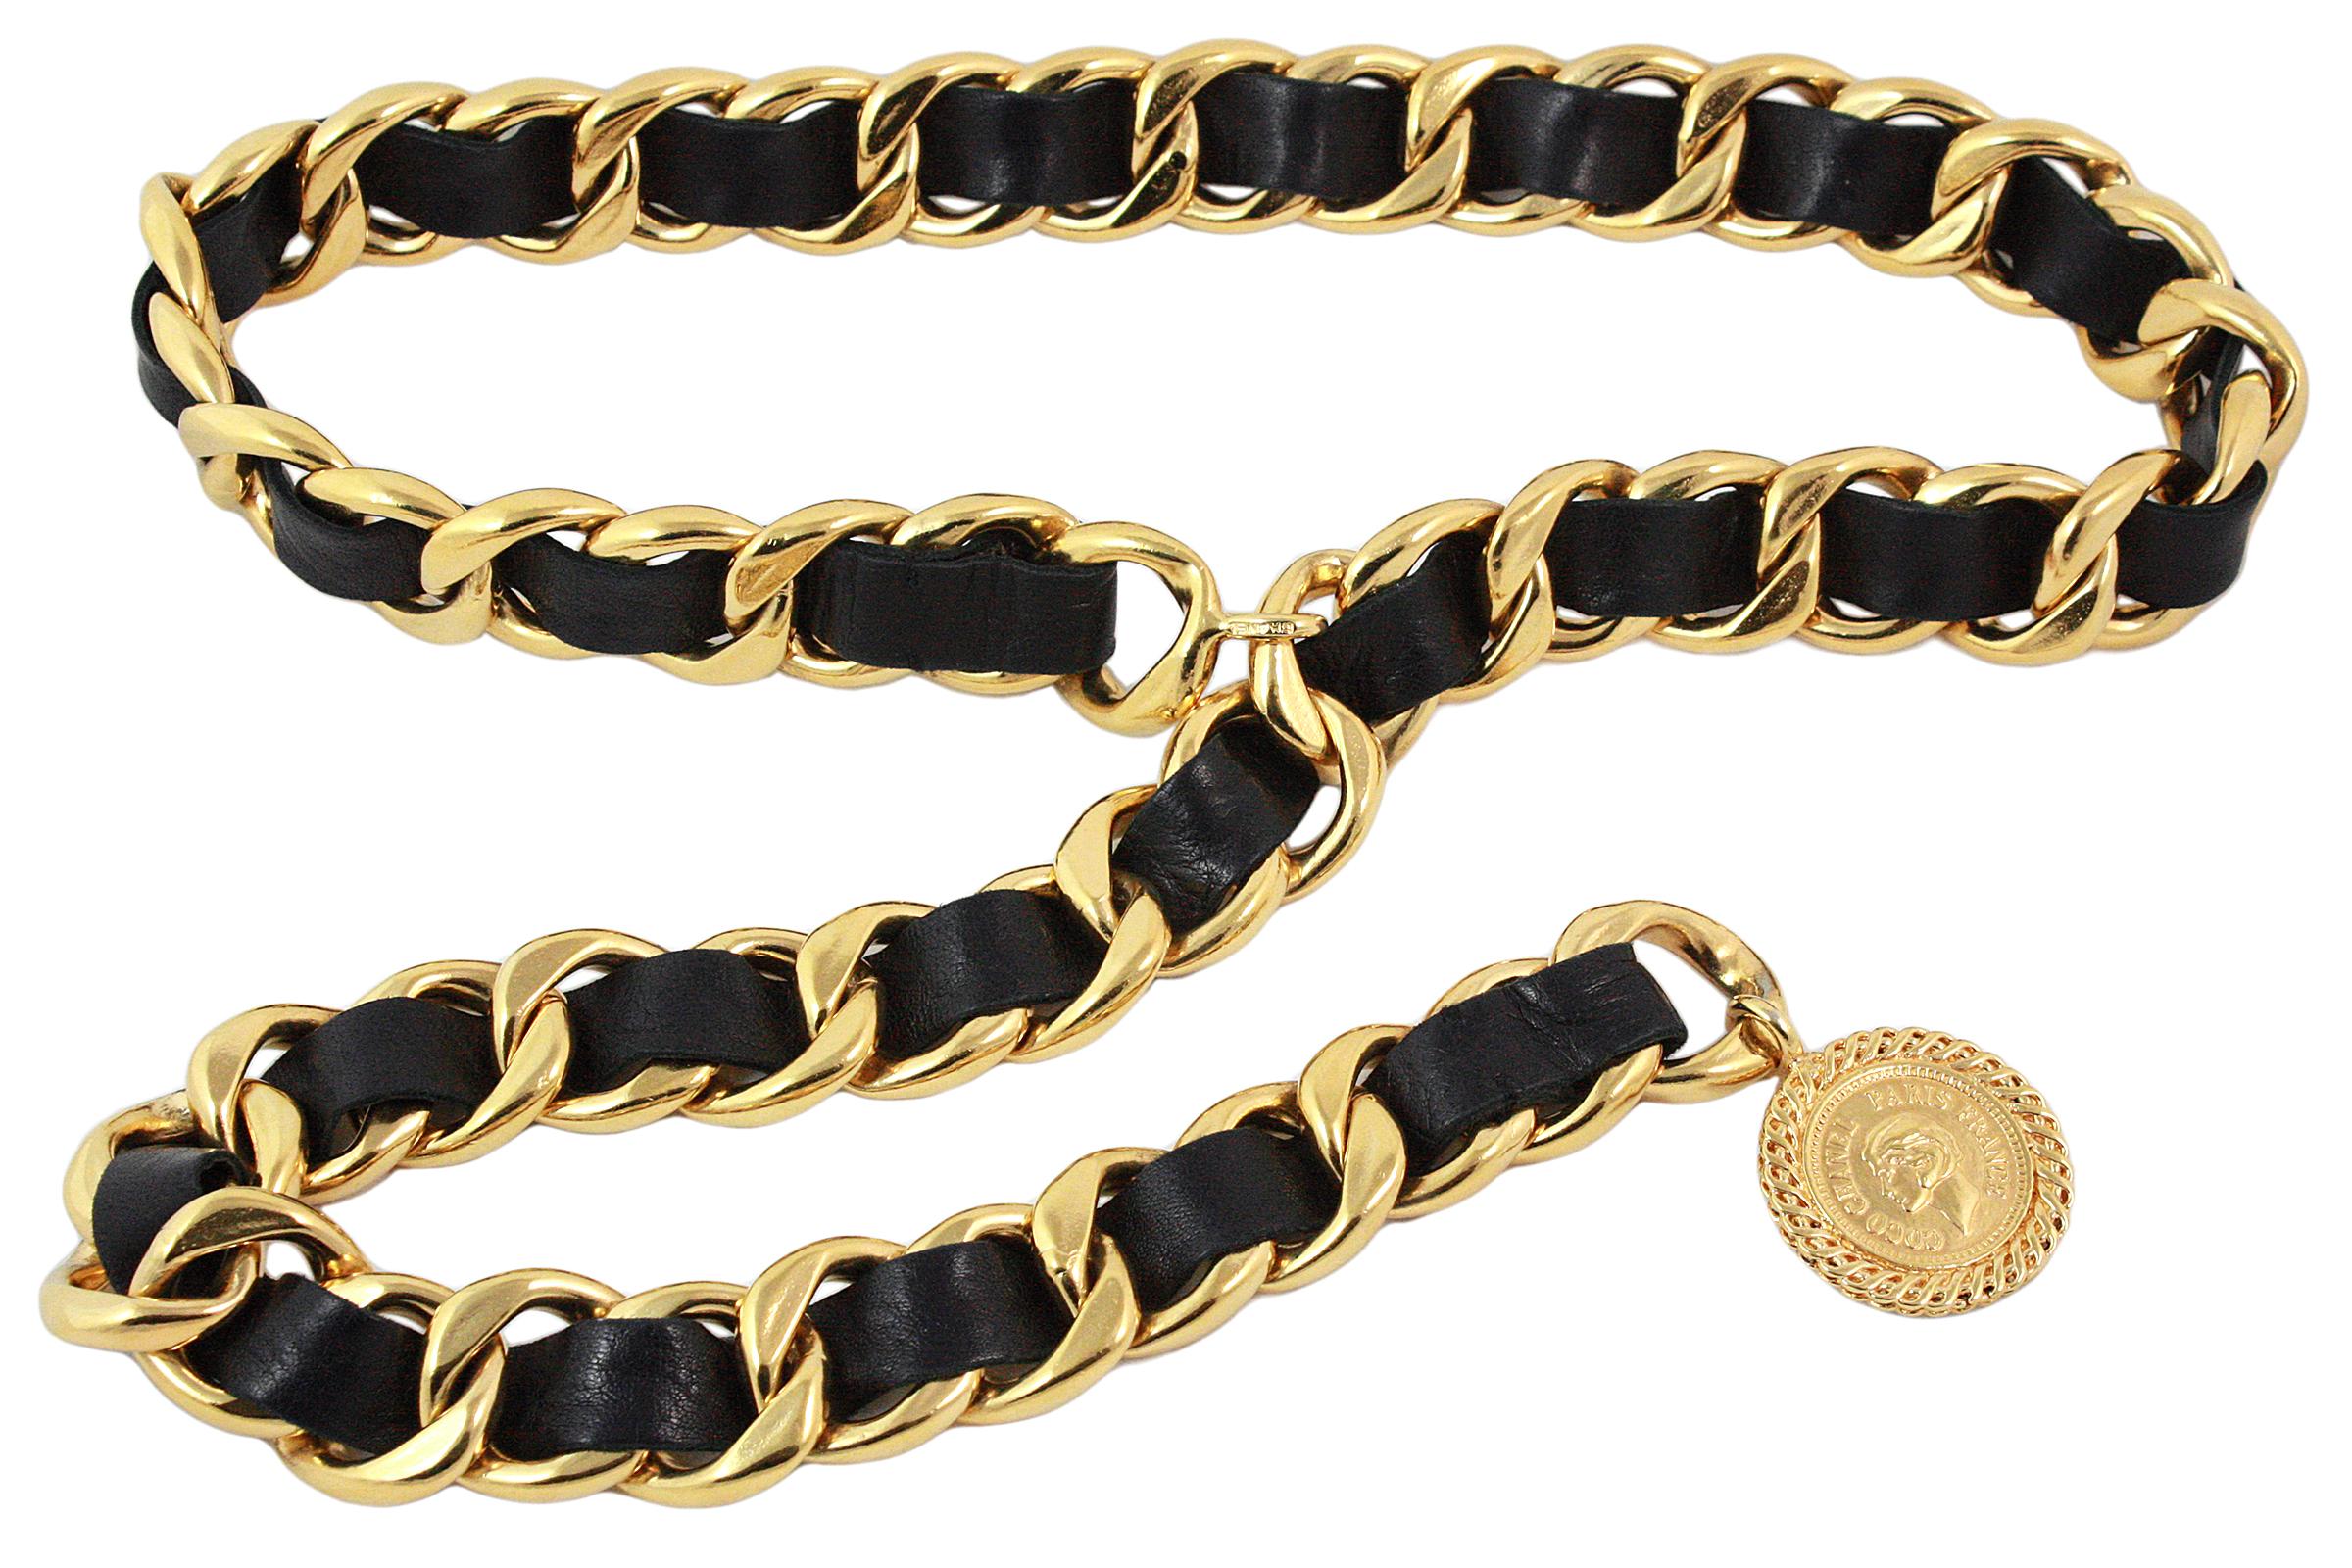 Chanel Vintage Black Leather Woven Gold Chain Belt
Features goldtone coin 
Color: Black and goldtone
Hardware: Goldtone
Materials: Leather and metal
Closure/Opening: Hook closure
Comes with black storage box